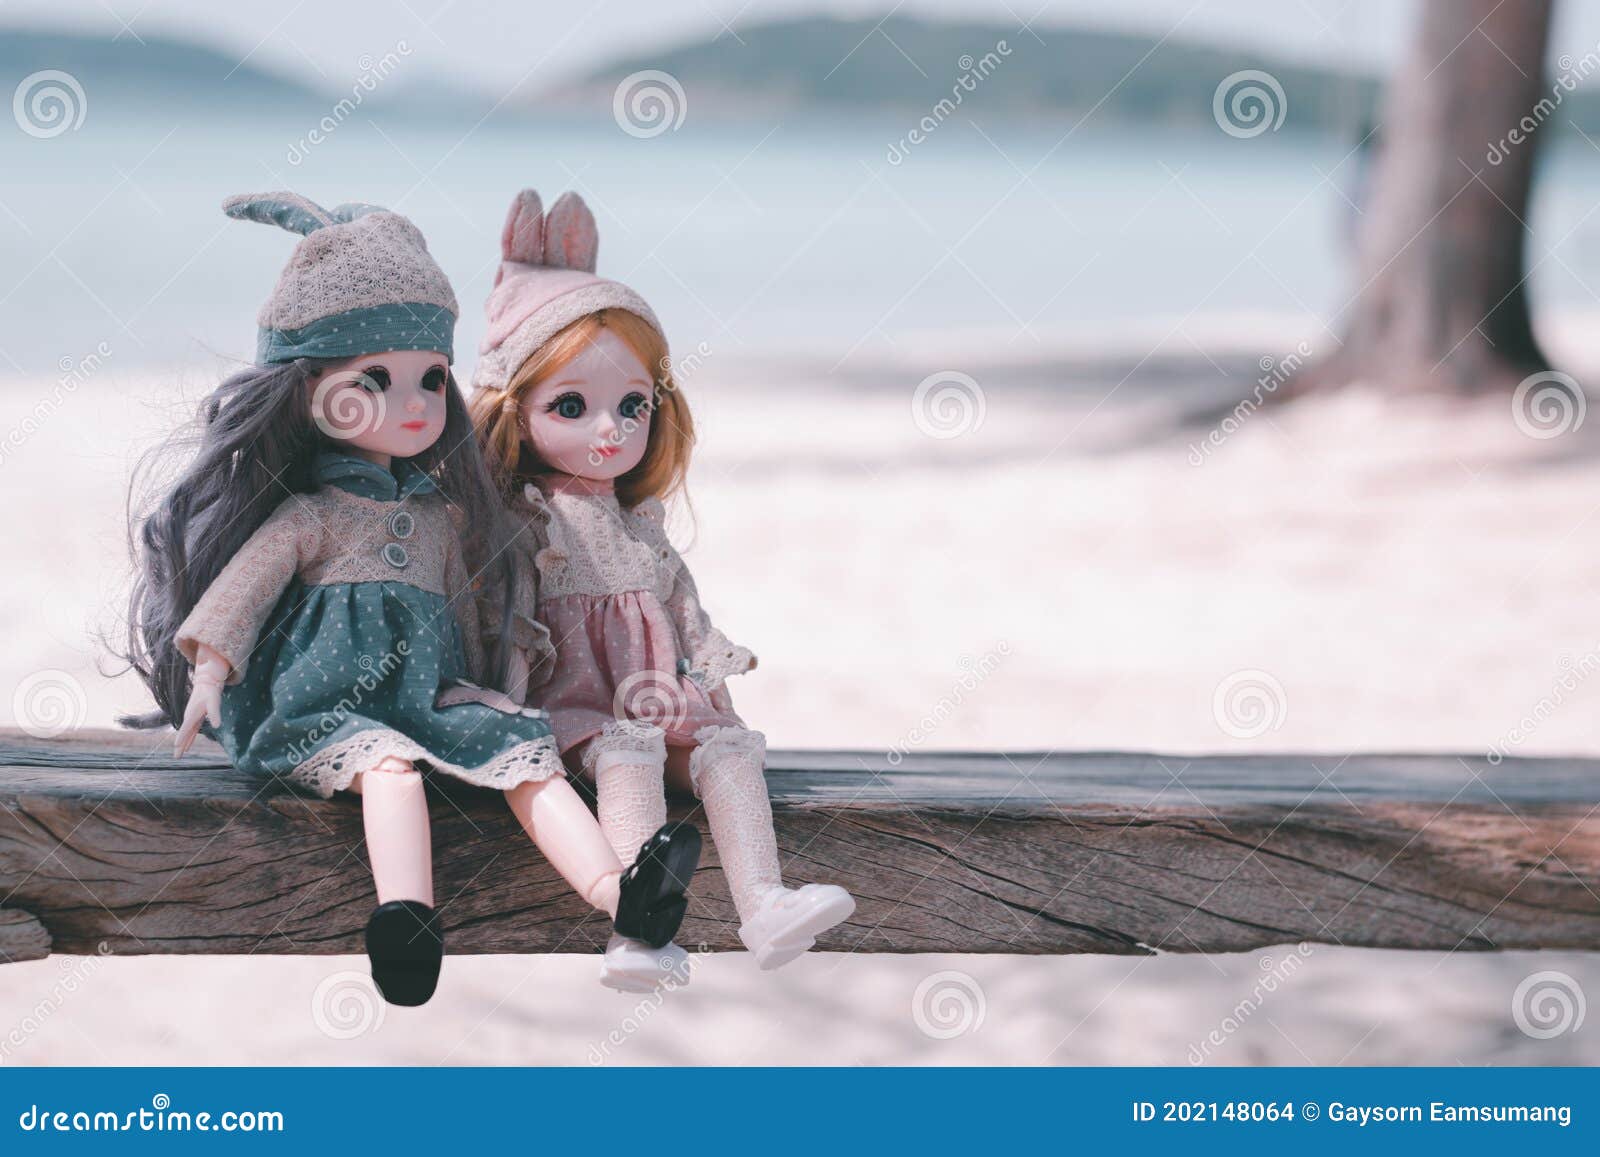 Two Dolls so Cute Sitting on Wood Swing with Sea Beach Background ...